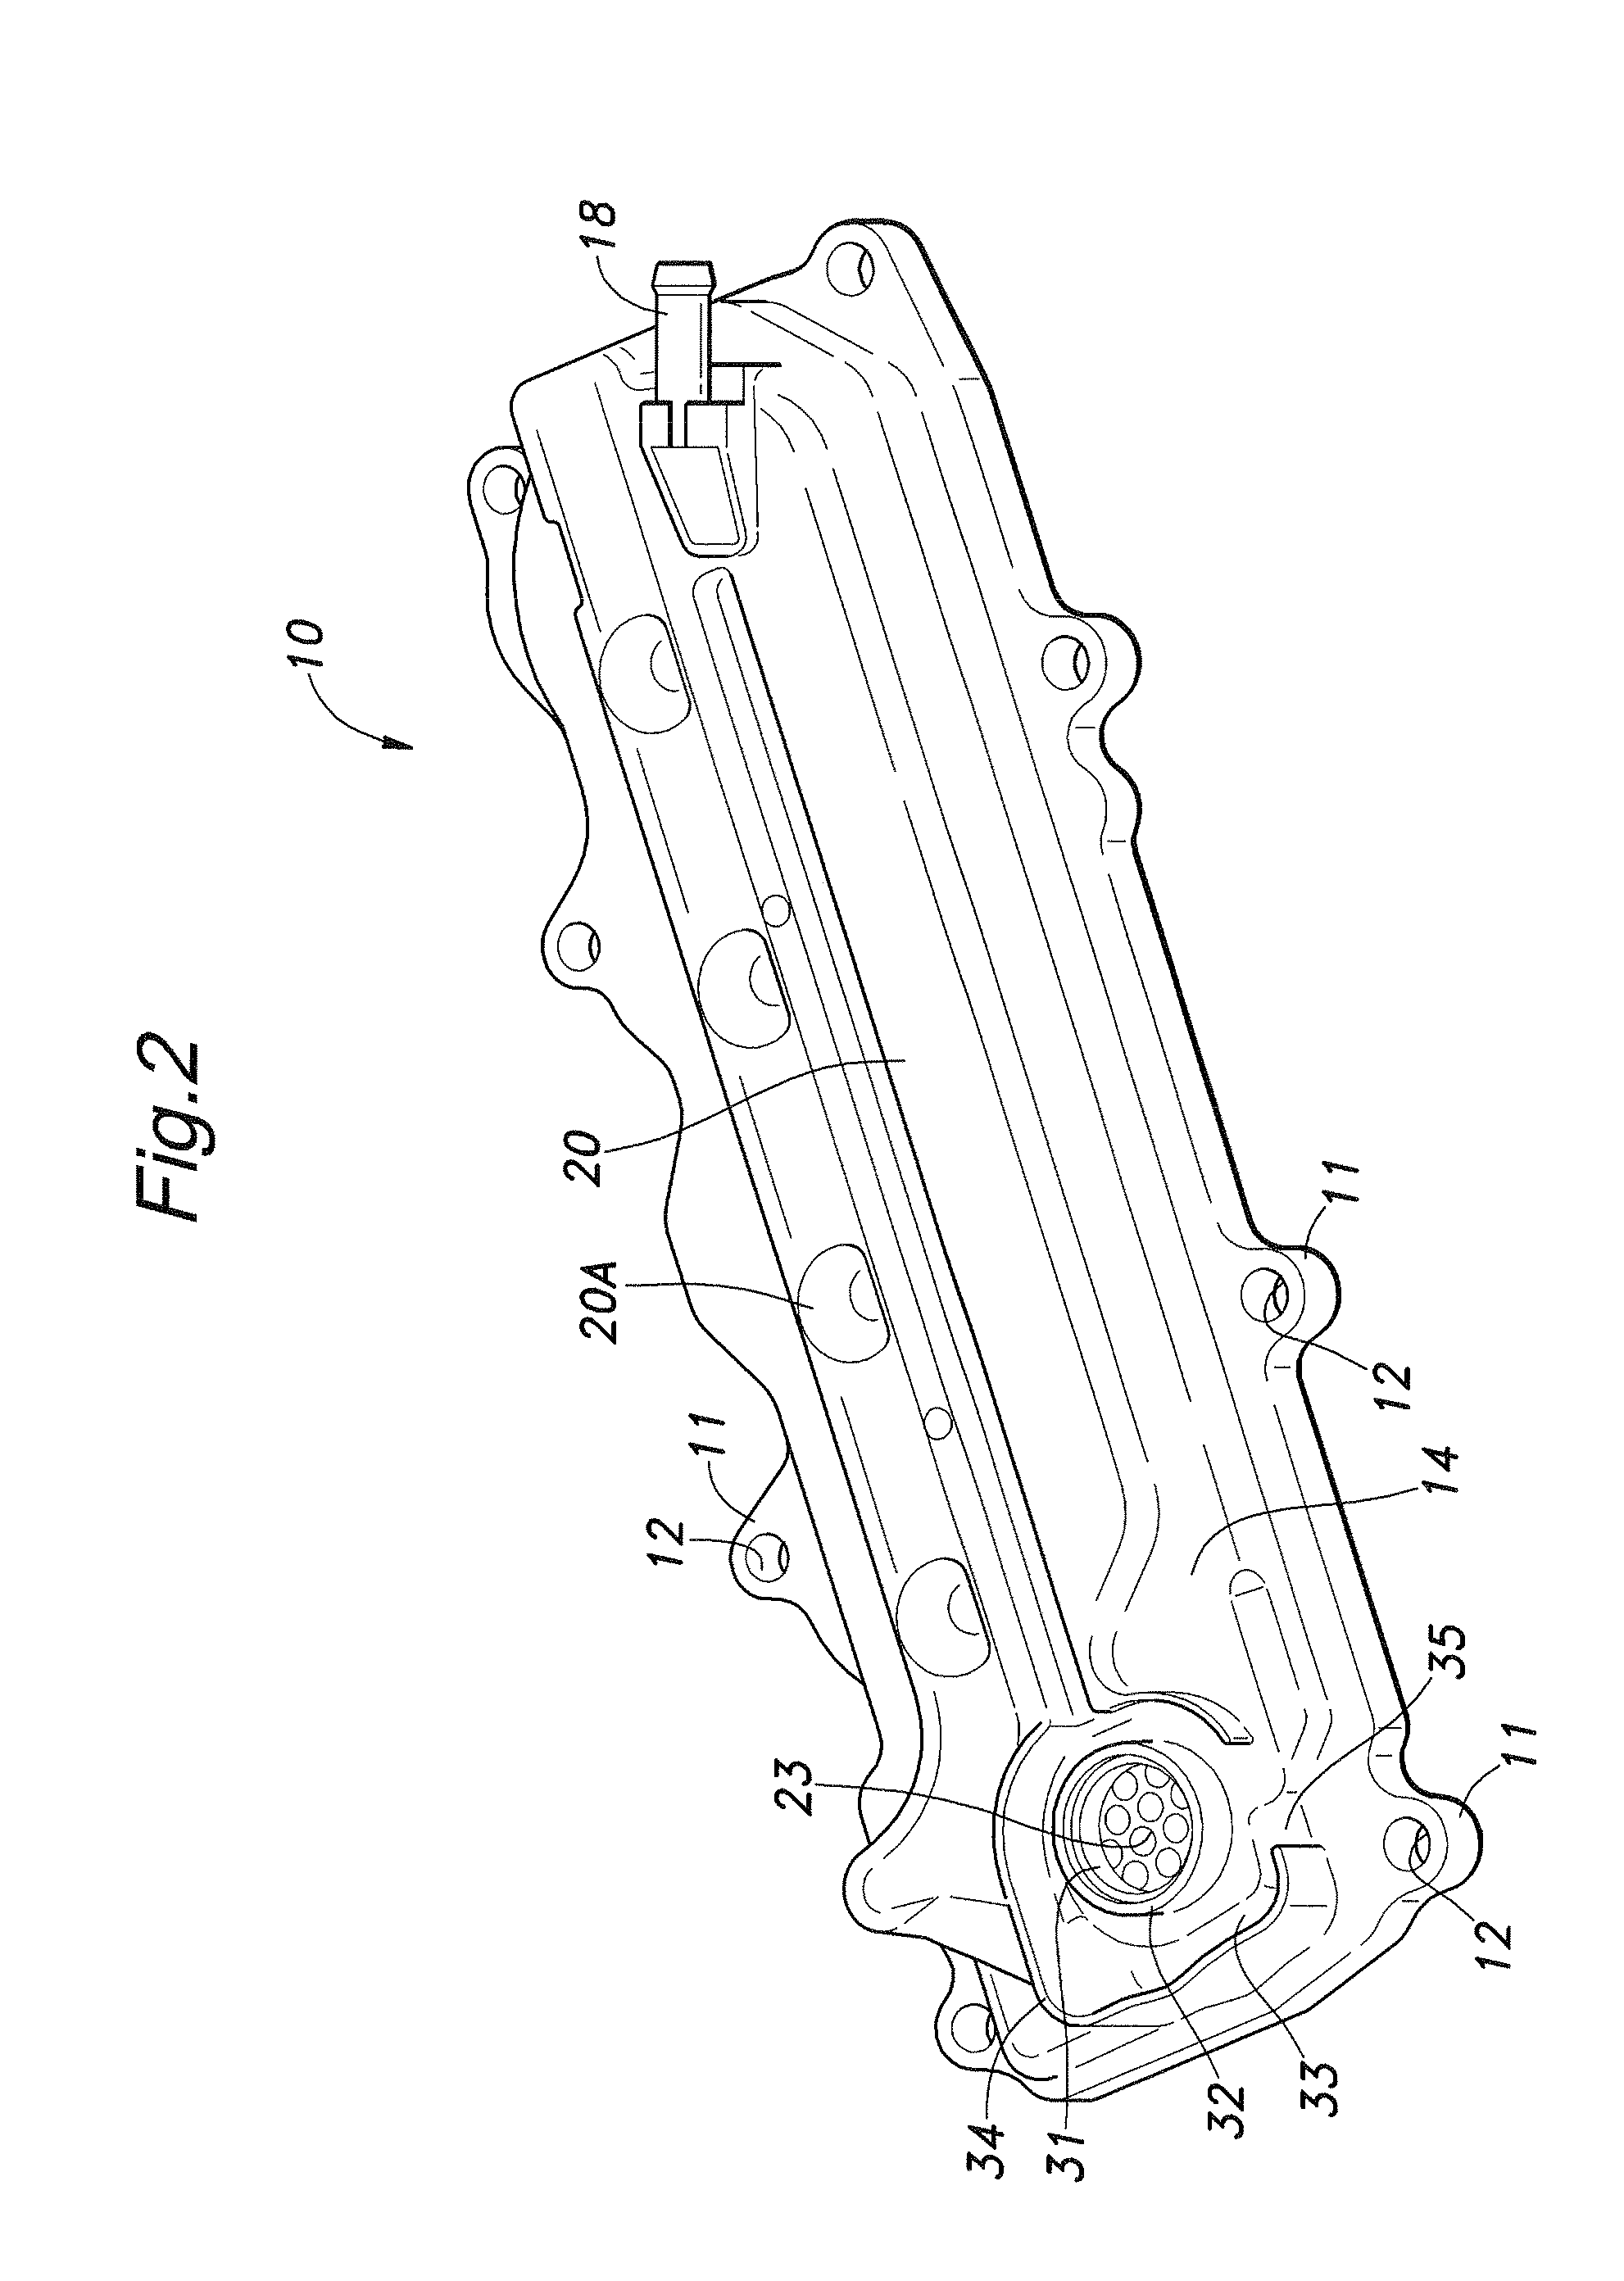 Head cover of an internal combustion engine